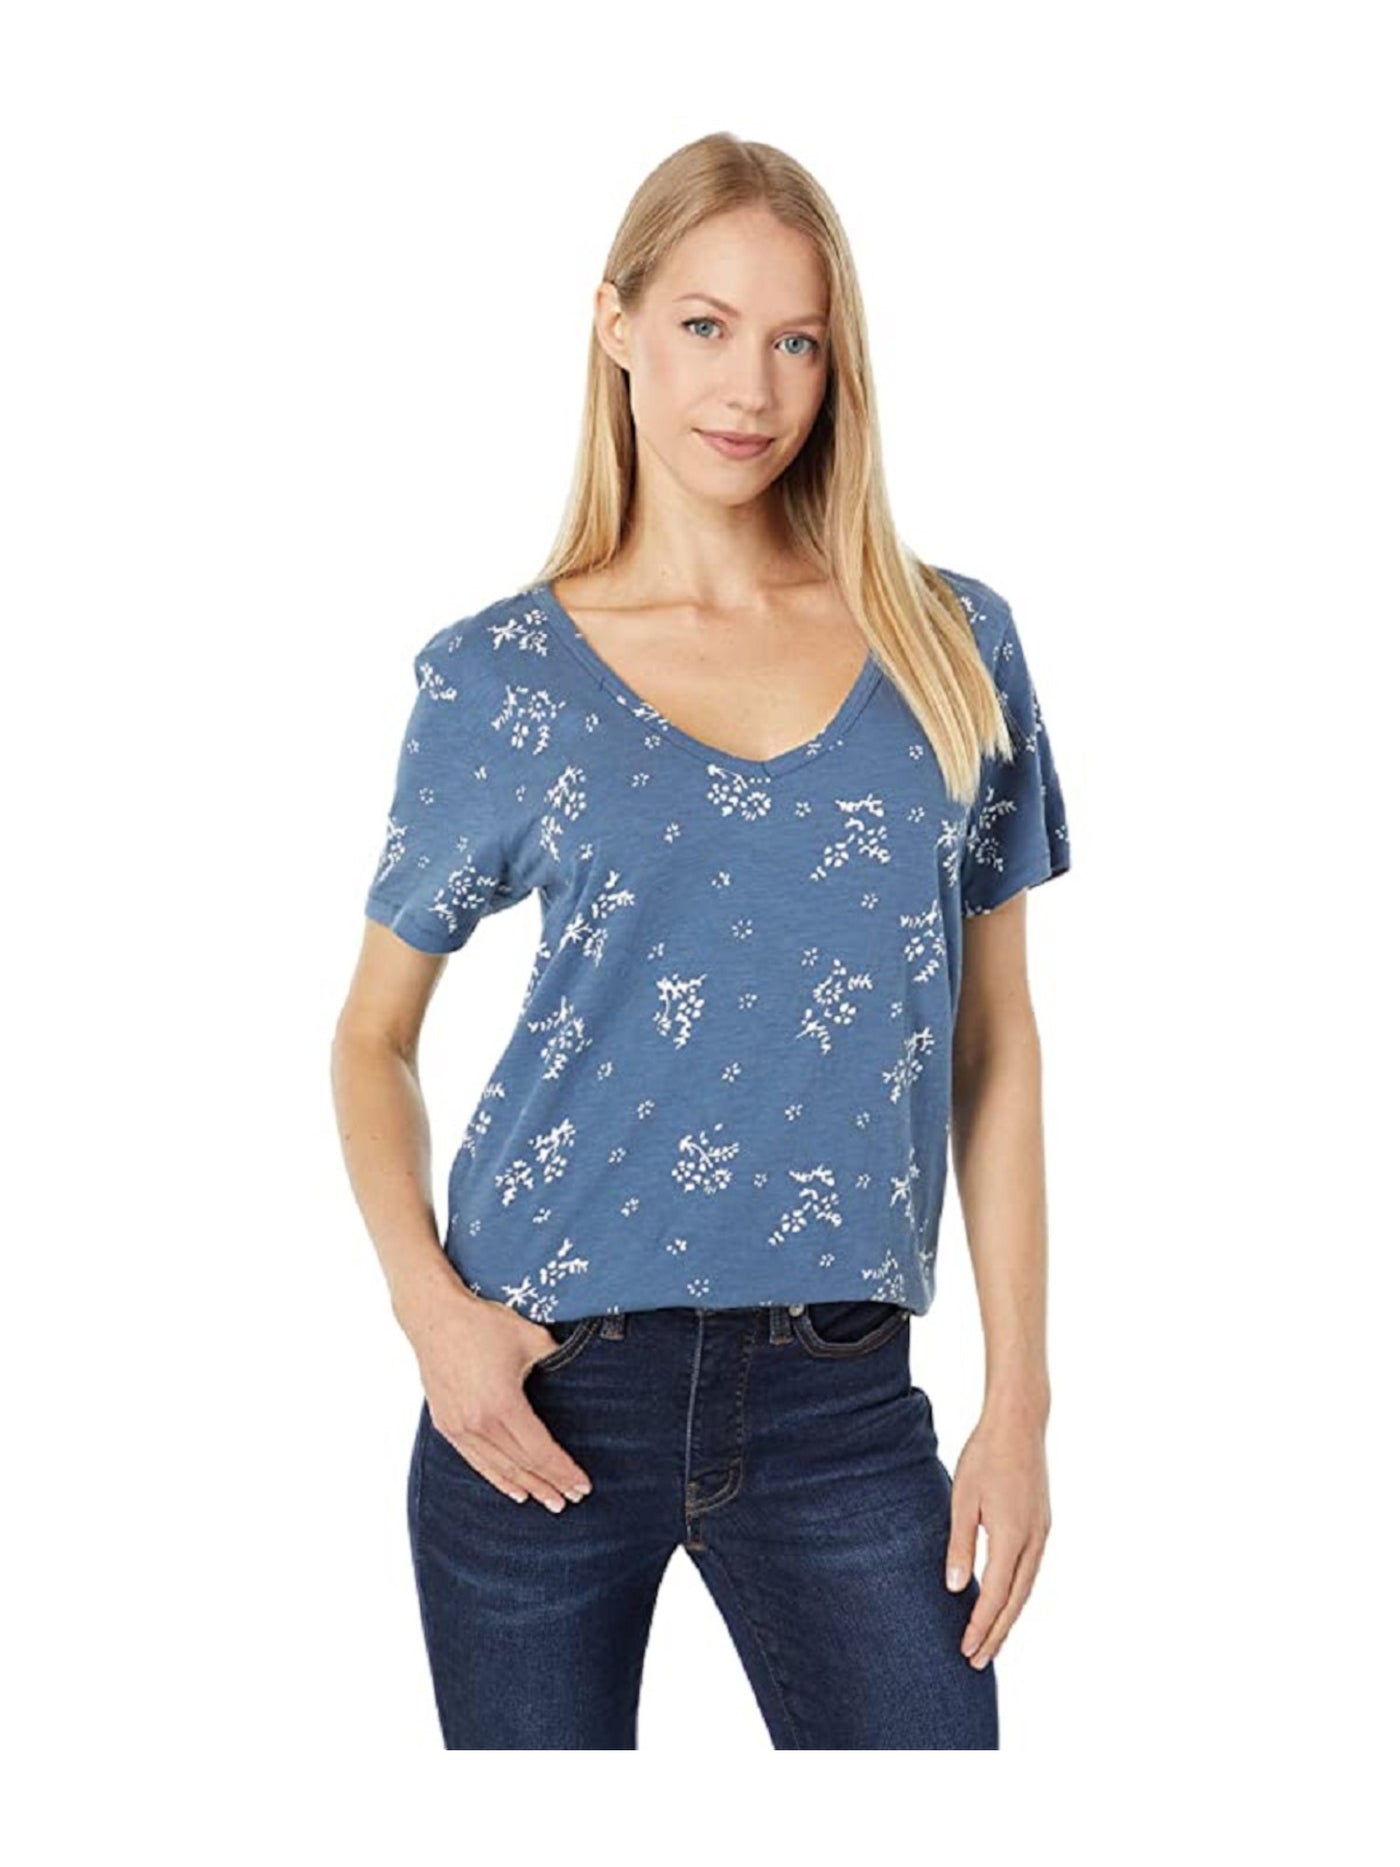 LUCKY BRAND Womens Blue Printed Short Sleeve V Neck Top XS